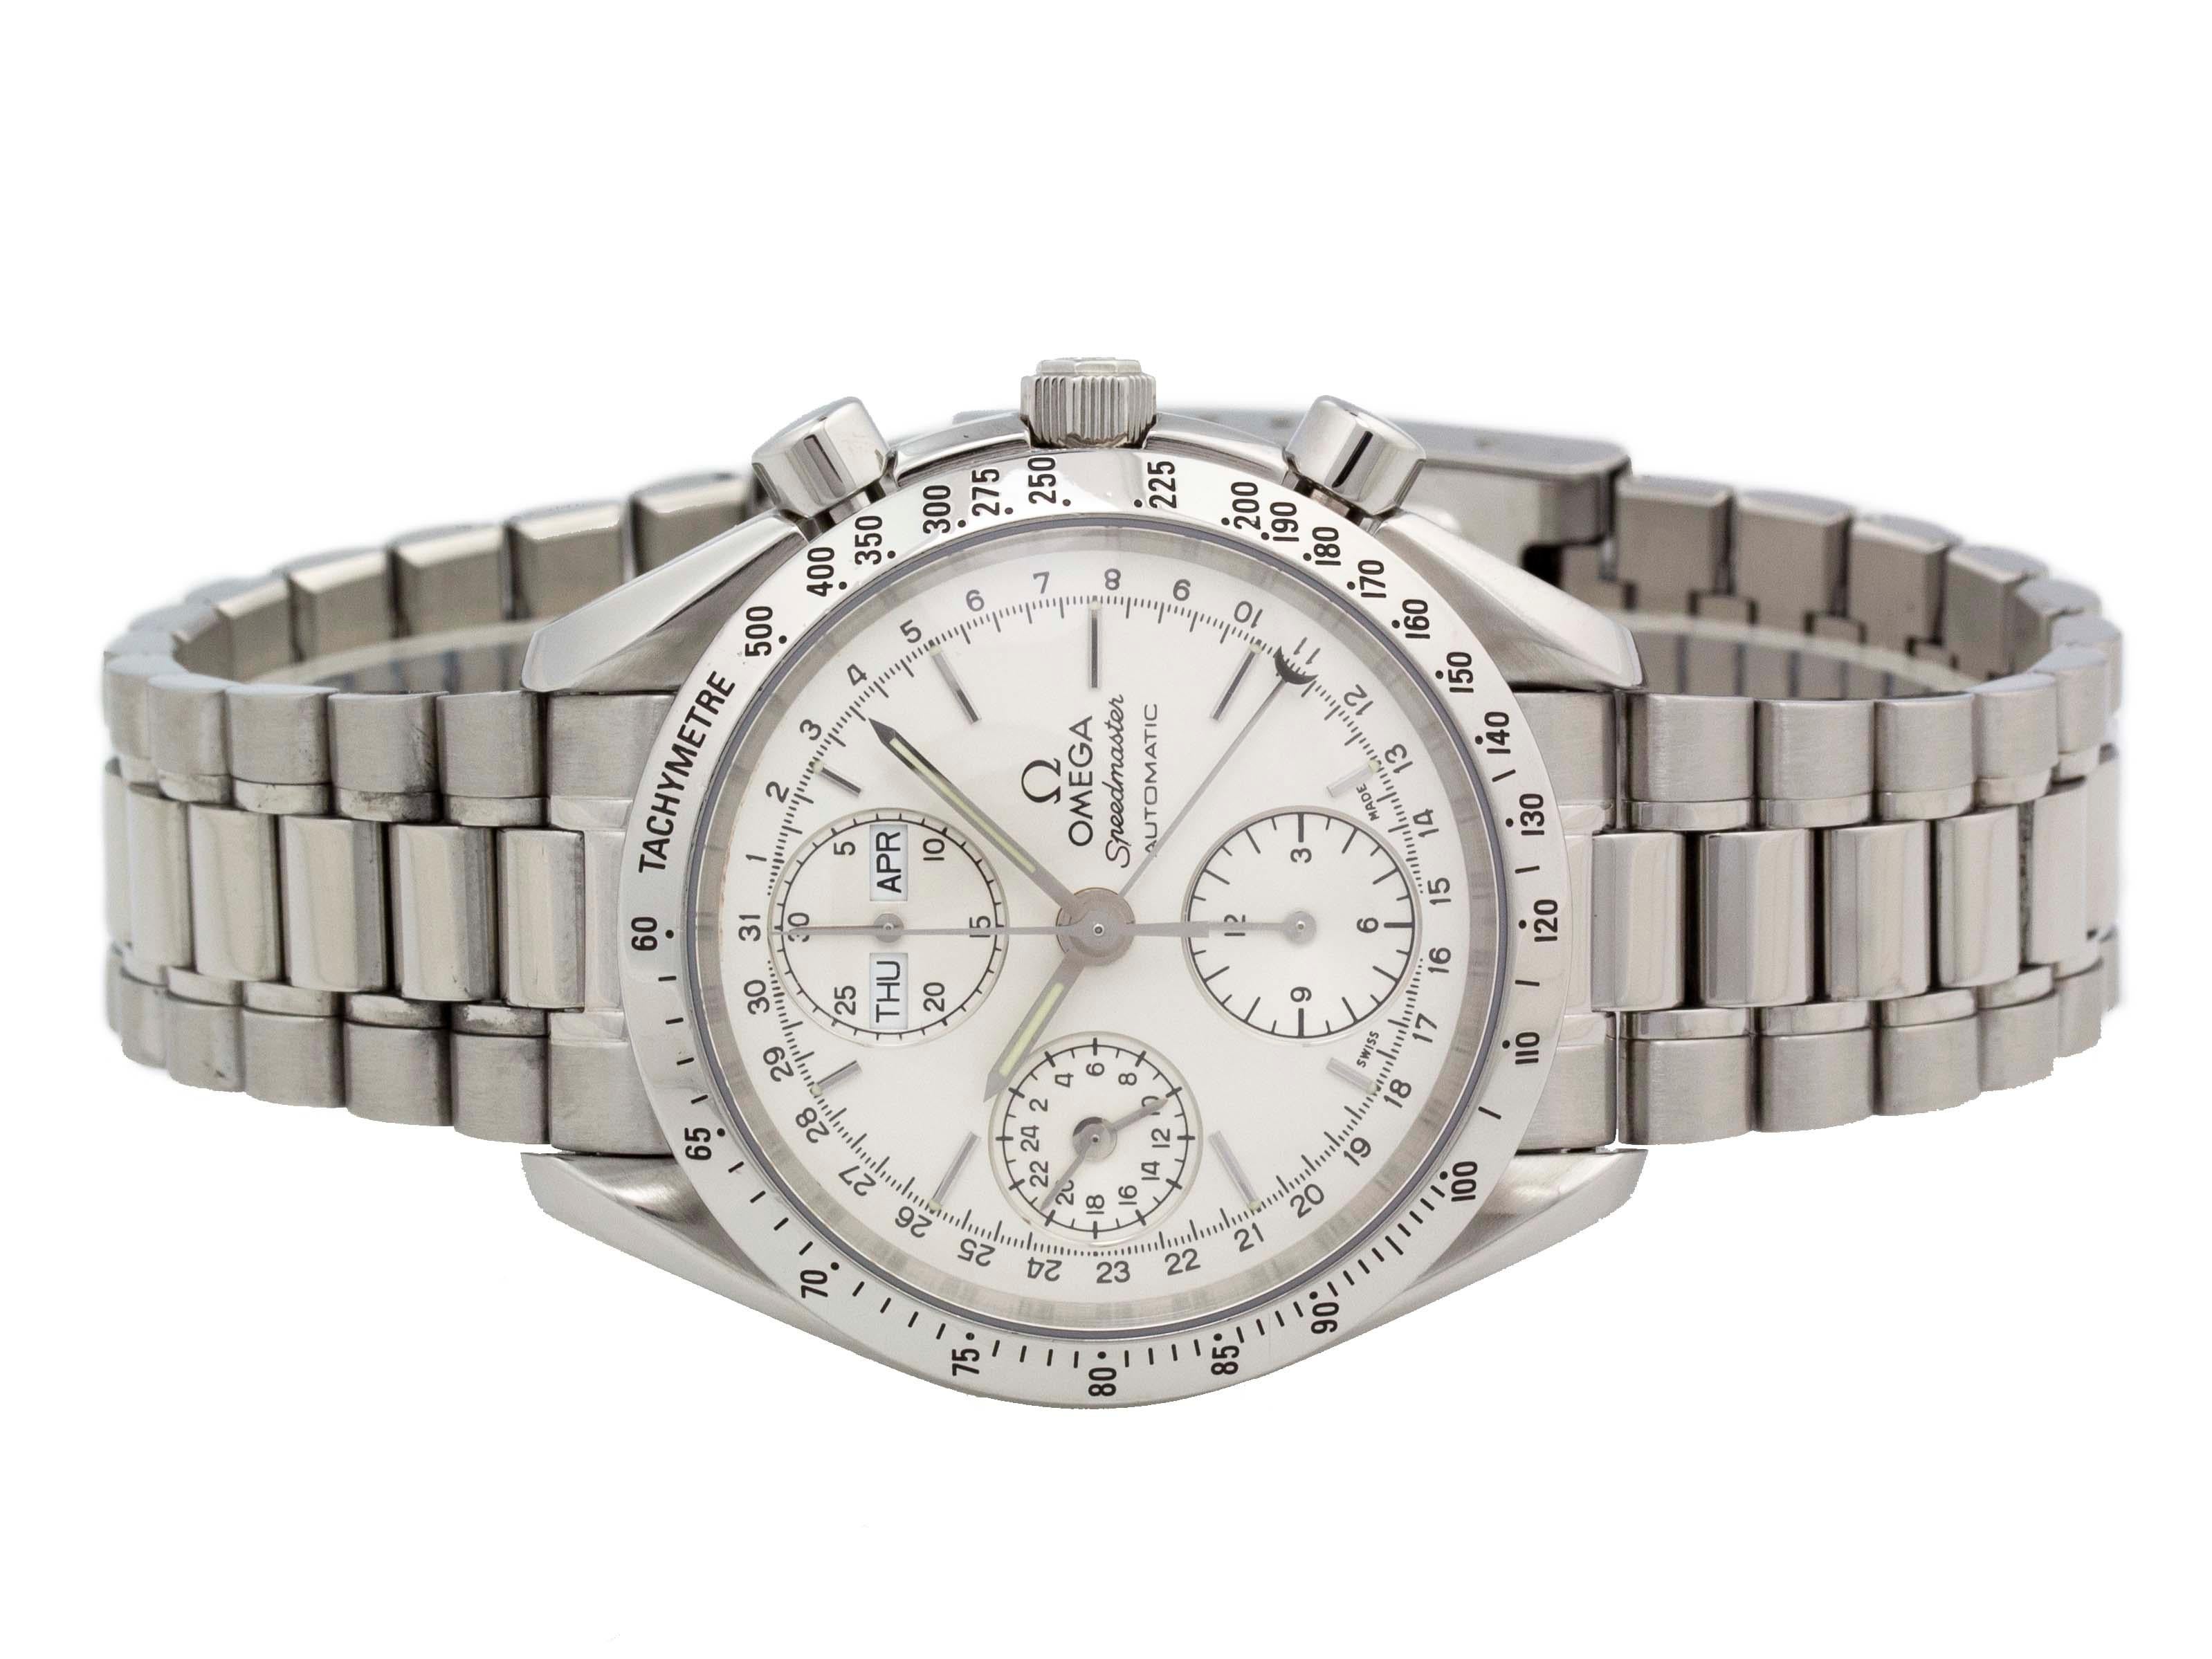 Stainless steel Omega Speedmaster automatic Watch with a 39mm case, silver dial, stainless steel bracelet foldover clasp. Features include hour, minute, second, day, month, and chronograph. Comes with Gift Box, Omega Manual, and 2 Year